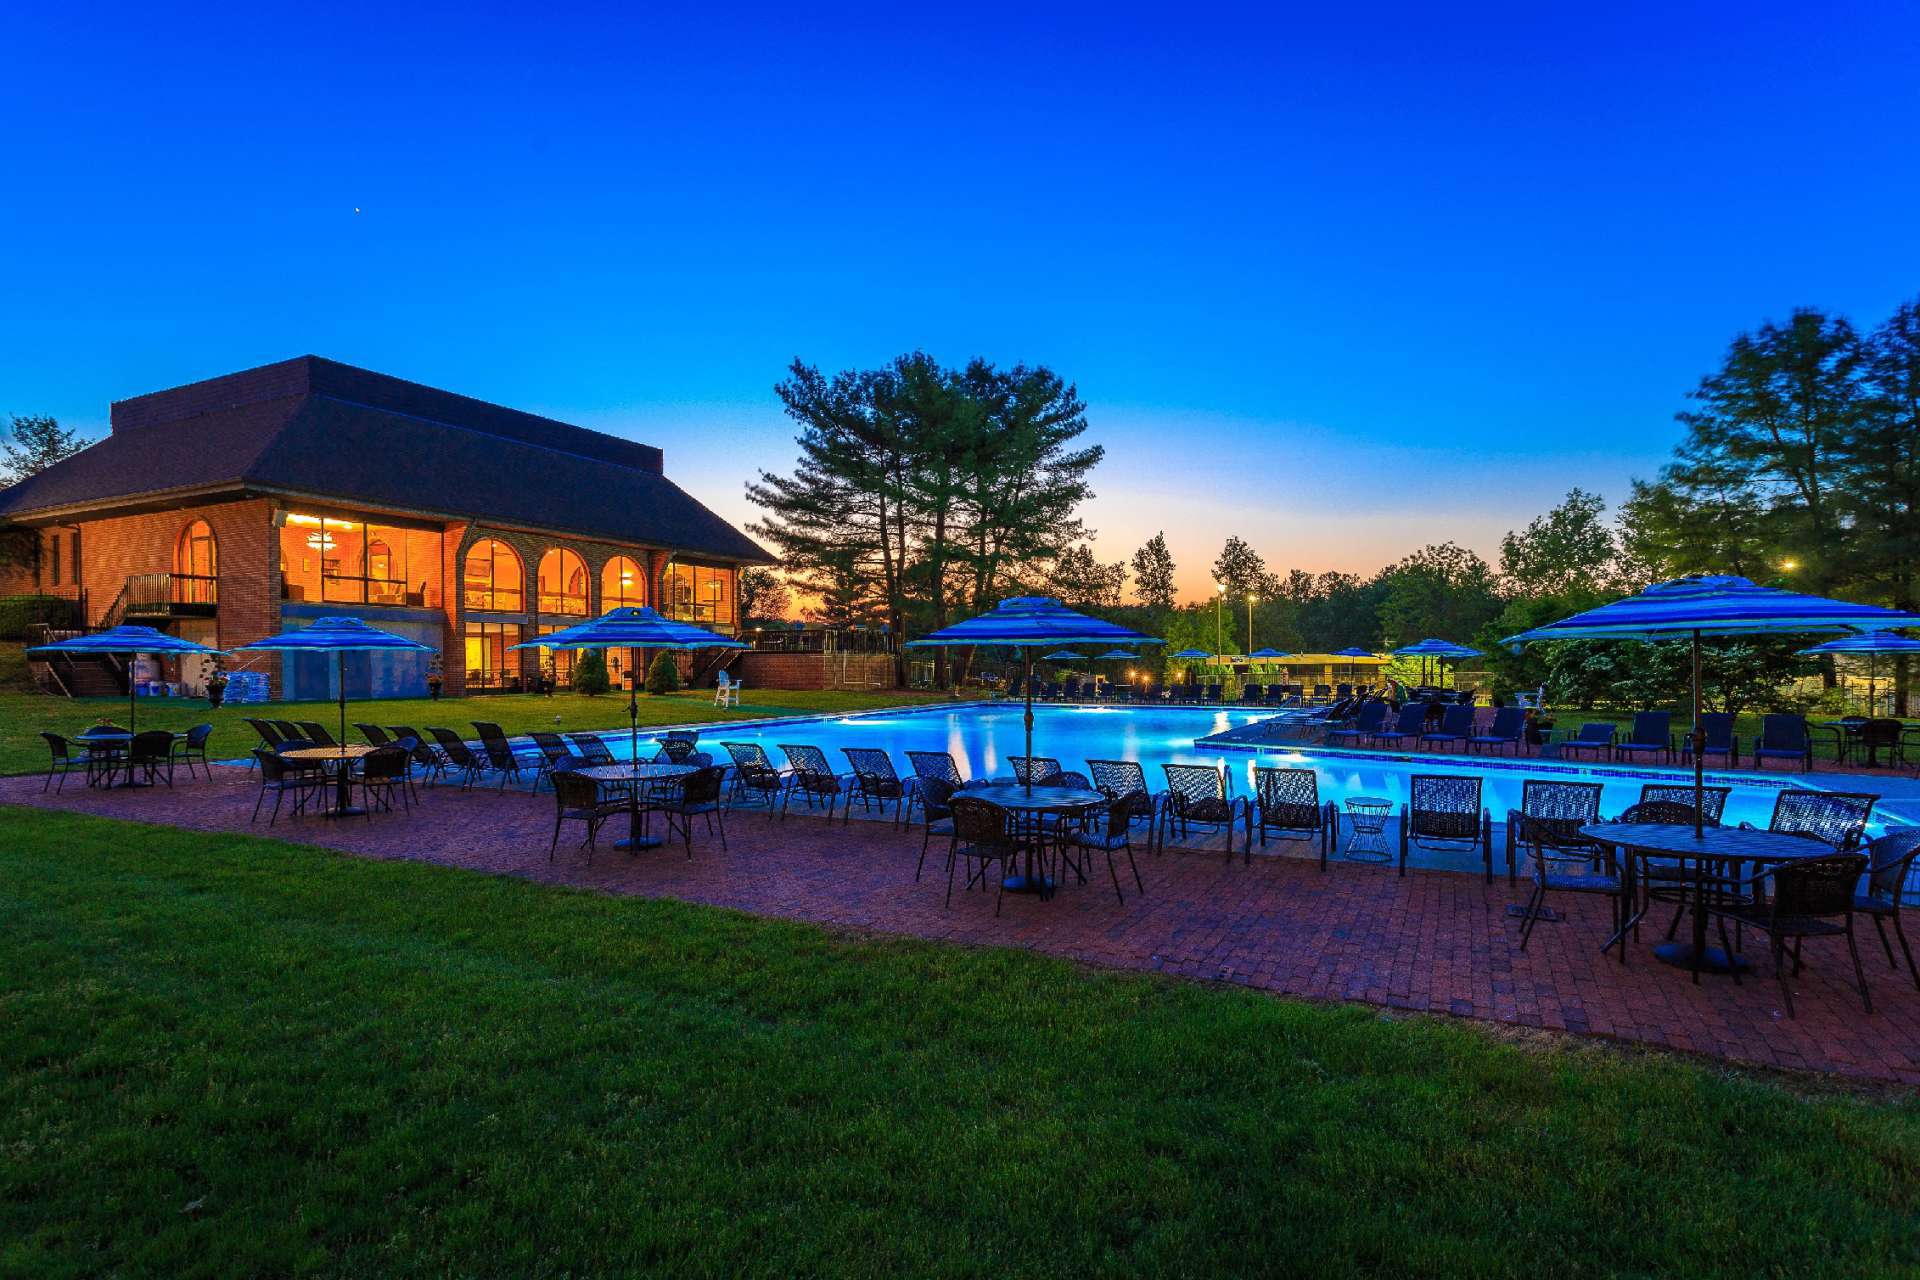 In-ground L shaped pool surrounded with brick patios. Variety of tables, umbrellas, & chairs.